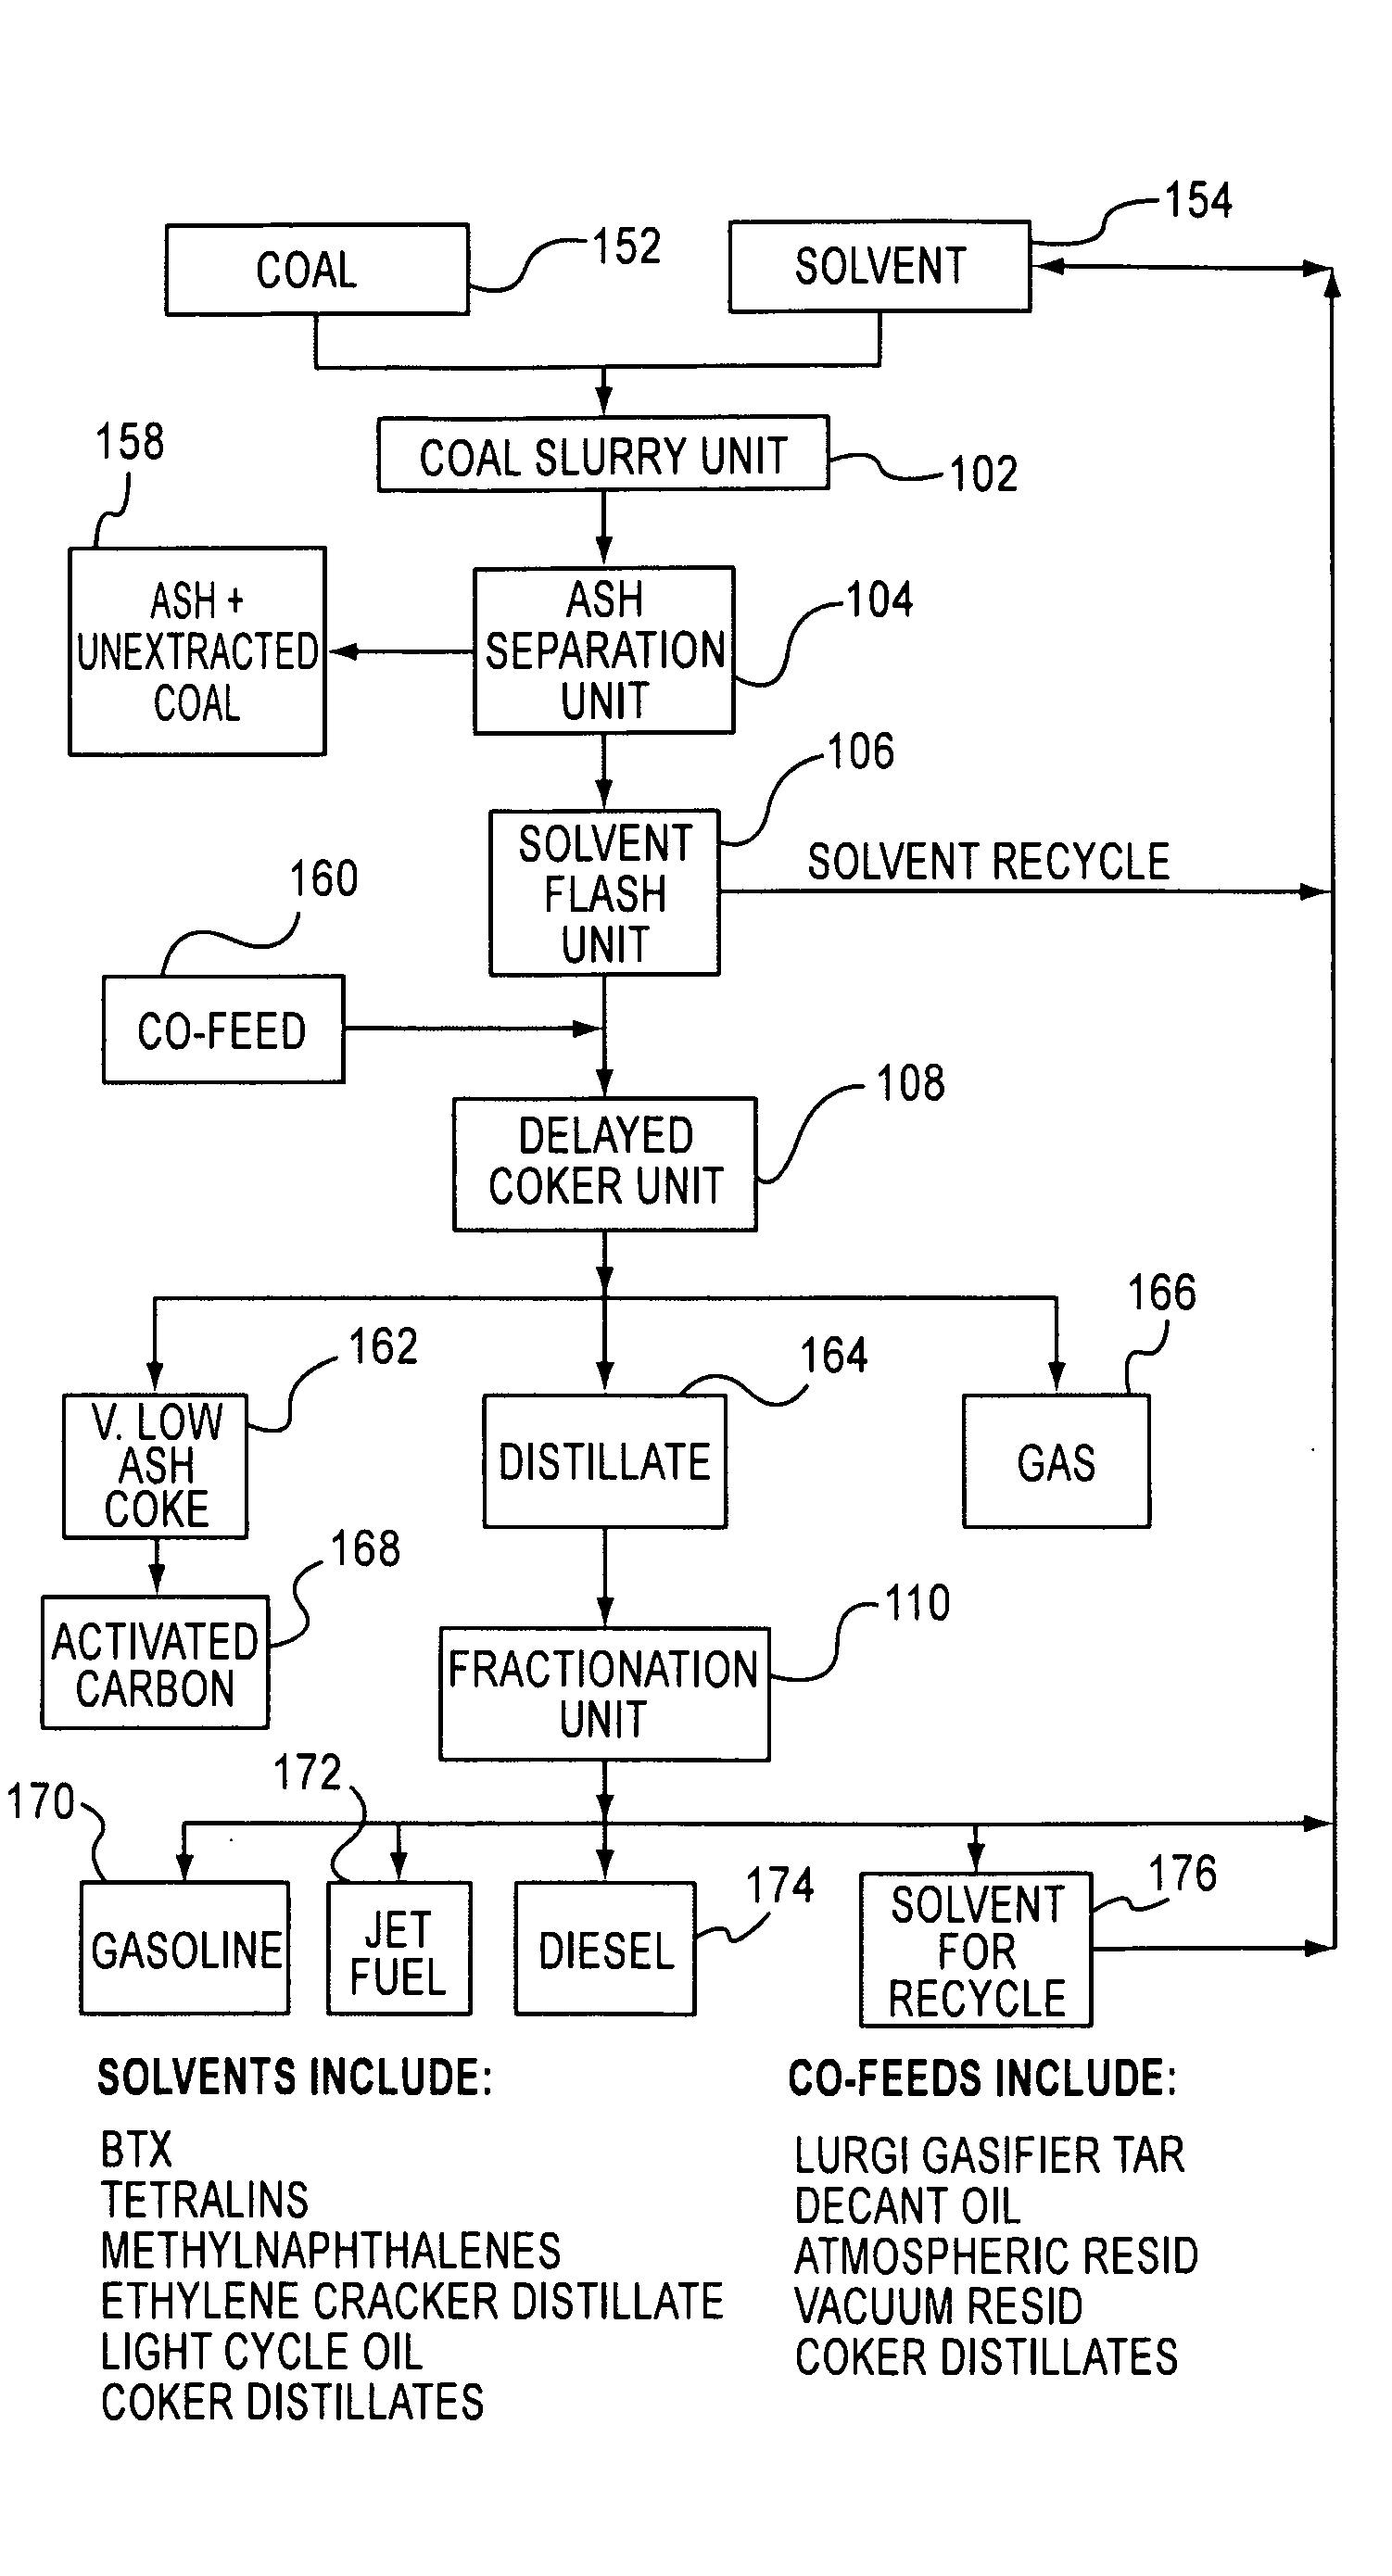 Apparatus and processes for production of coke and activated carbon from coal products